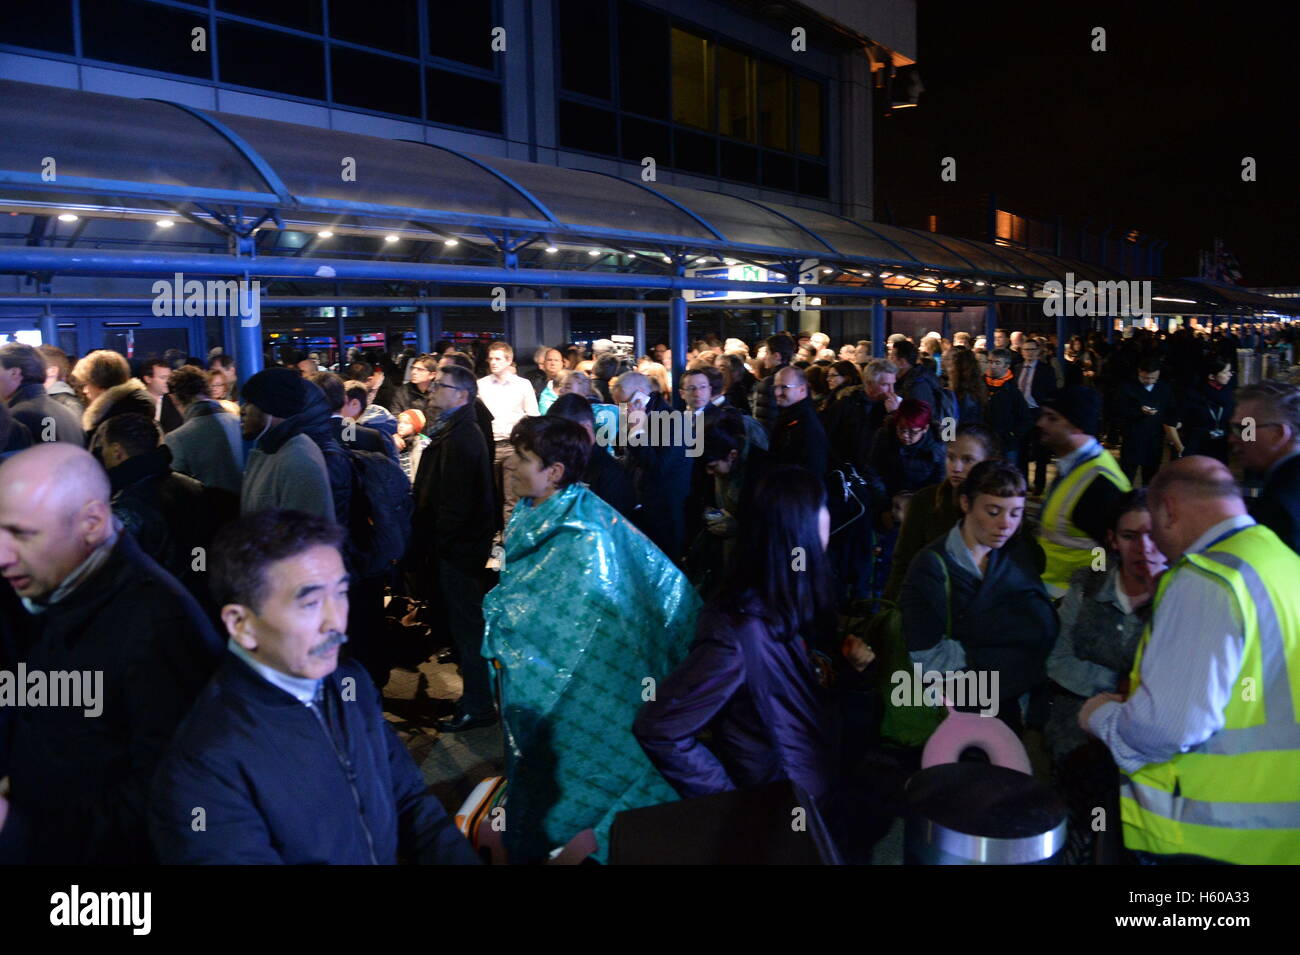 Poeple outside London City Airport which has been closed as dozens of passengers were treated for breathing difficulties after a suspected chemical incident at the airport. Stock Photo